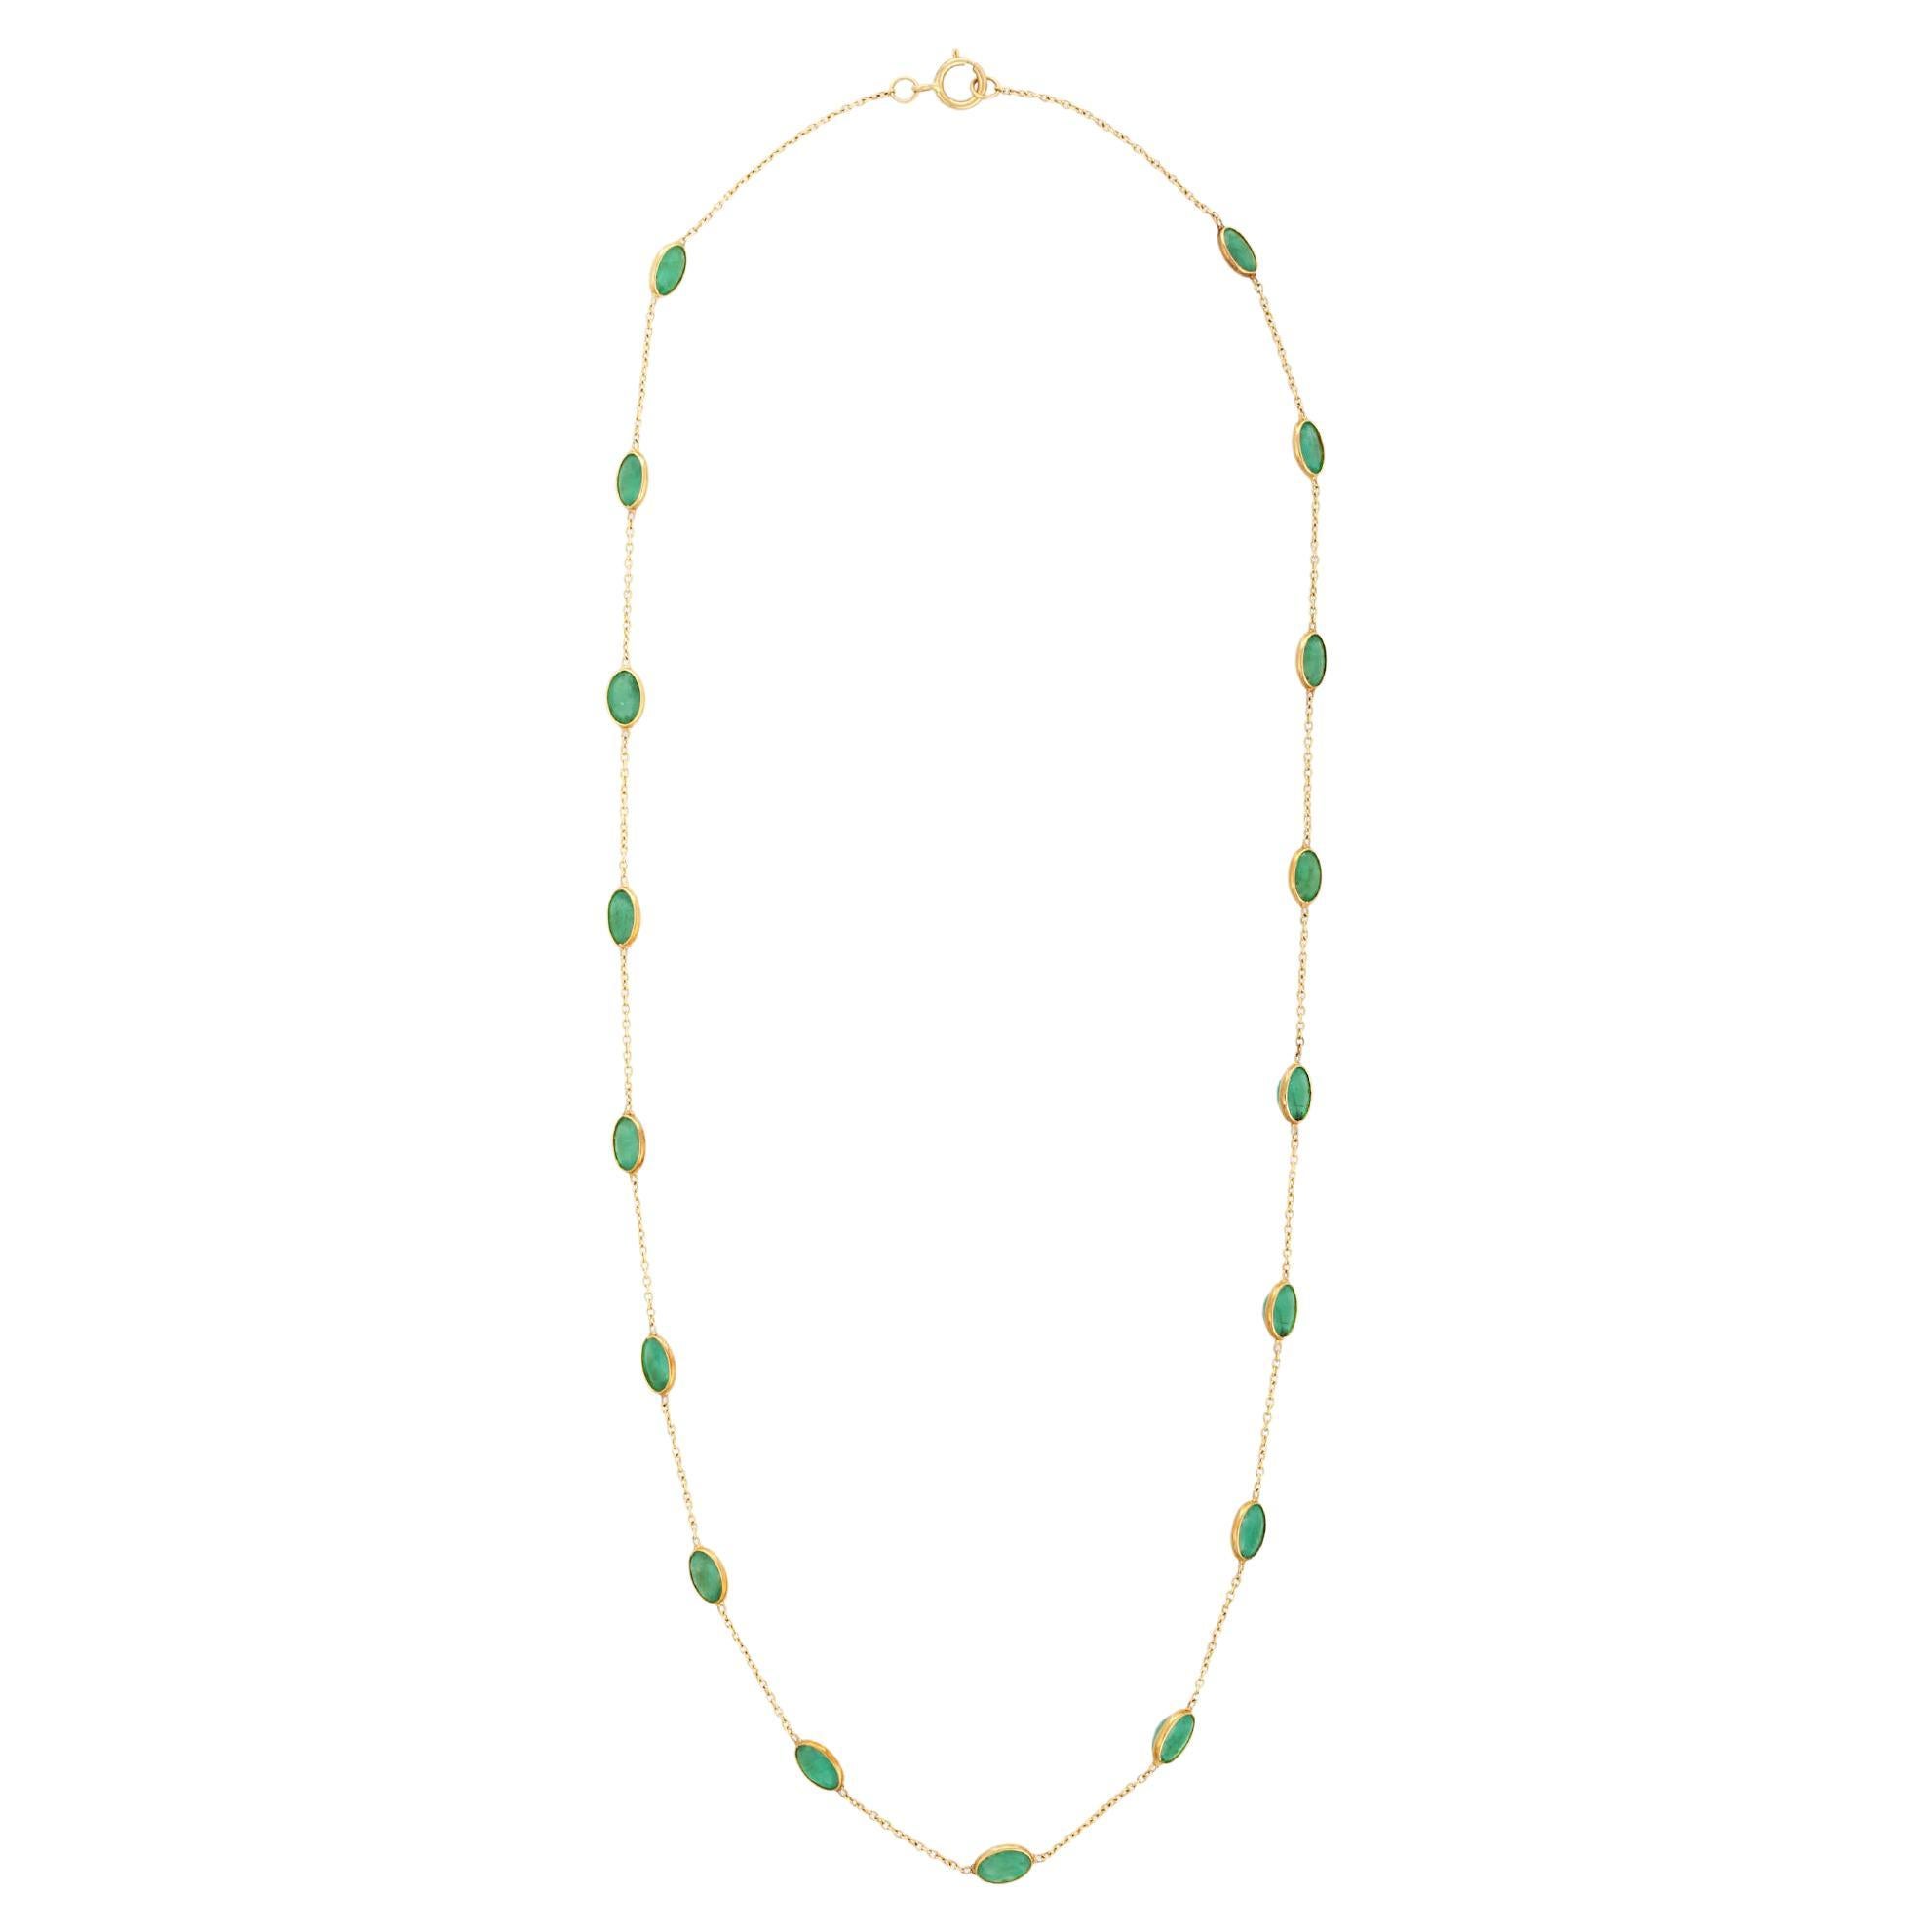 Modern 18K Yellow Gold Oval Cut 7.6 Ct Green Emerald Chain Necklace